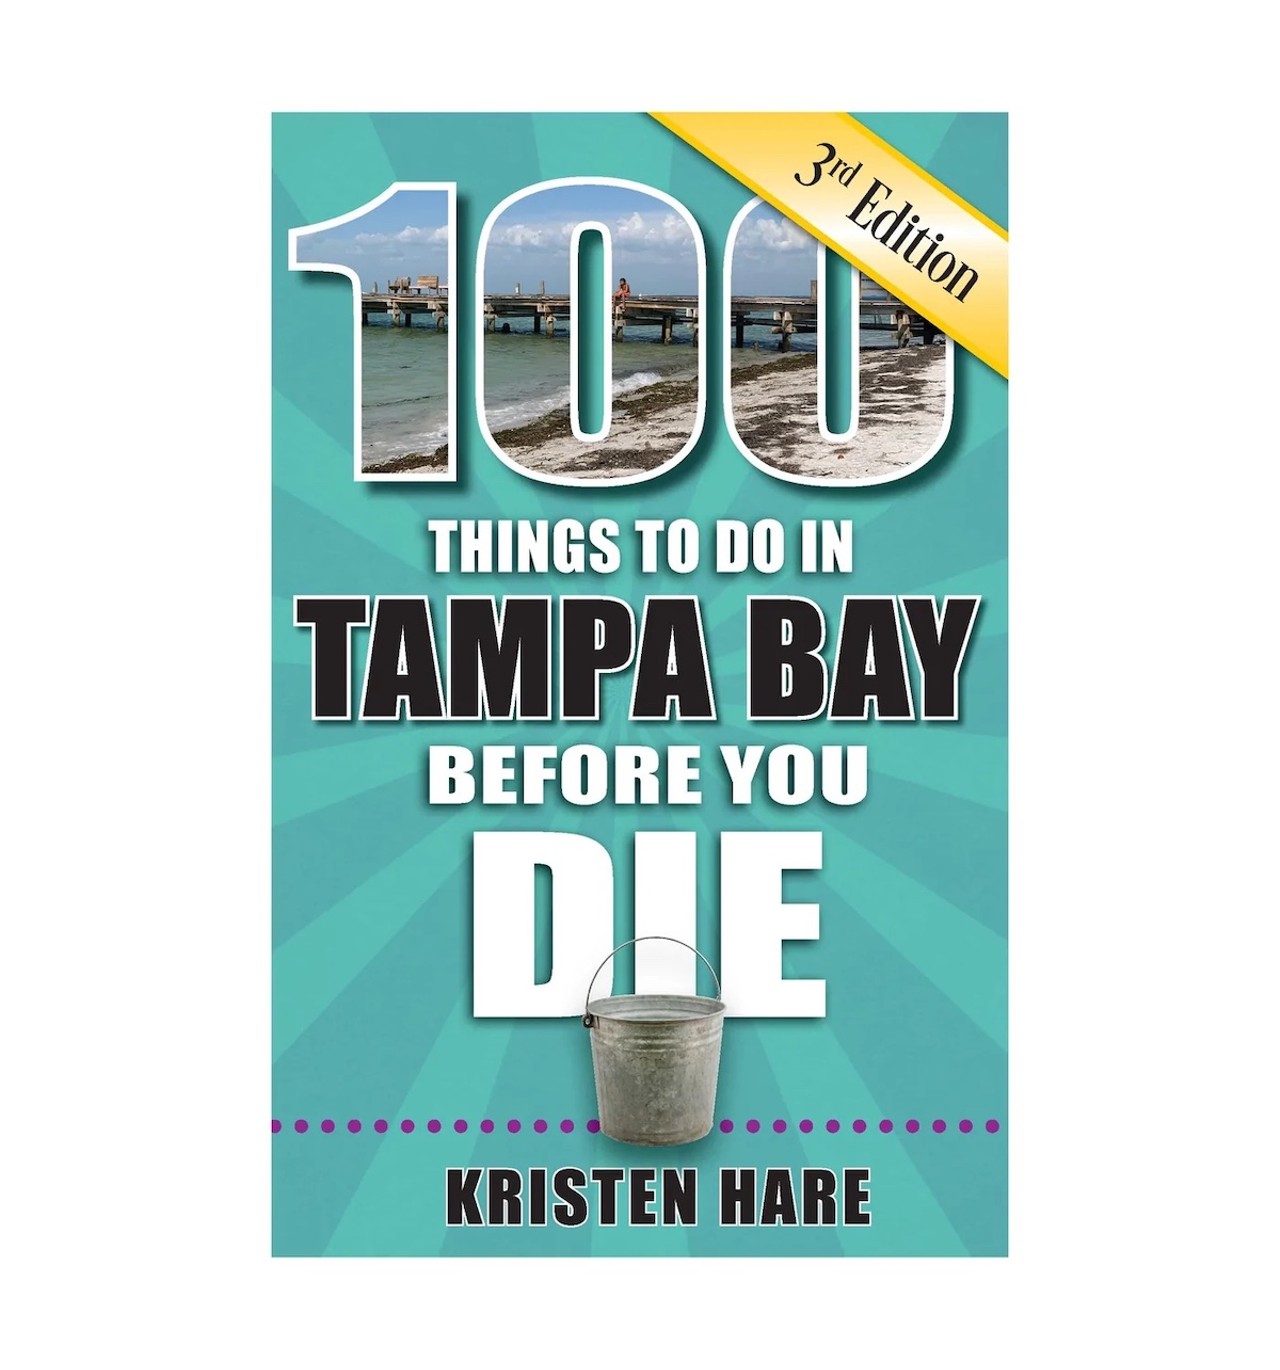 Nonfiction
100 Things To Do In Tampa Bay Before You Die (3rd Edition) by Kristen Hare
After releasing the first edition of “100 Things” in 2014, Tampa Bay Times obituary writer Kristen Hare returned this year with the third installment that’s not only a guidebook for newcomers but a secret list of things that even the most seasoned Tampa Bay locals might not have done.
For fans of: road trips, not arguing over what to do today (Reedy Press, $17)